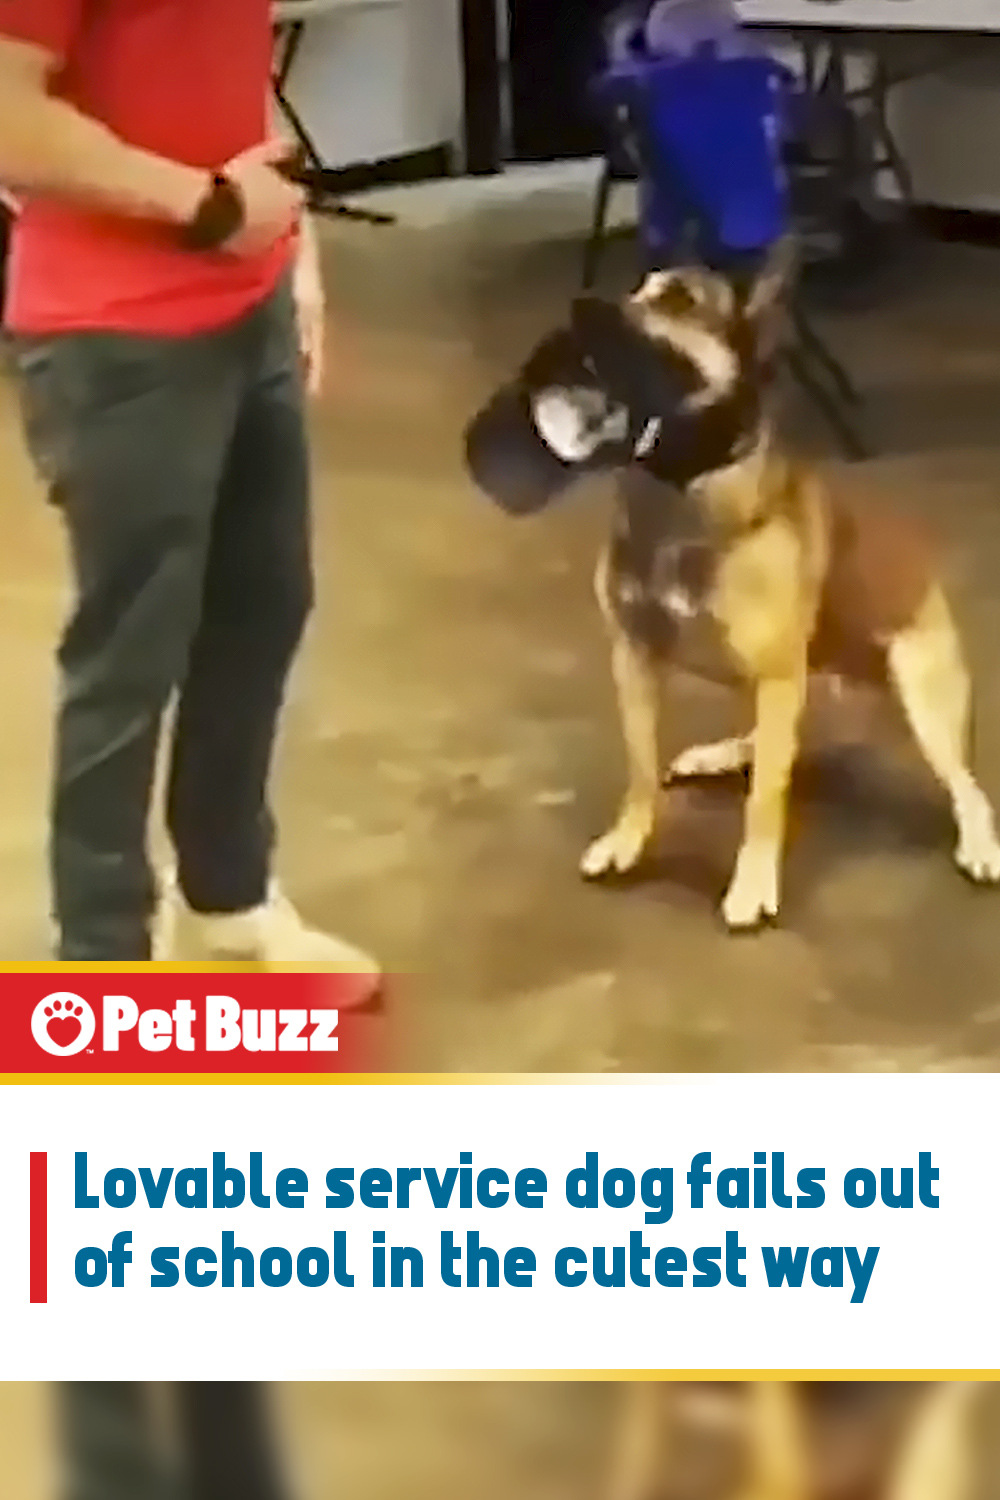 Lovable service dog fails out of school in the cutest way